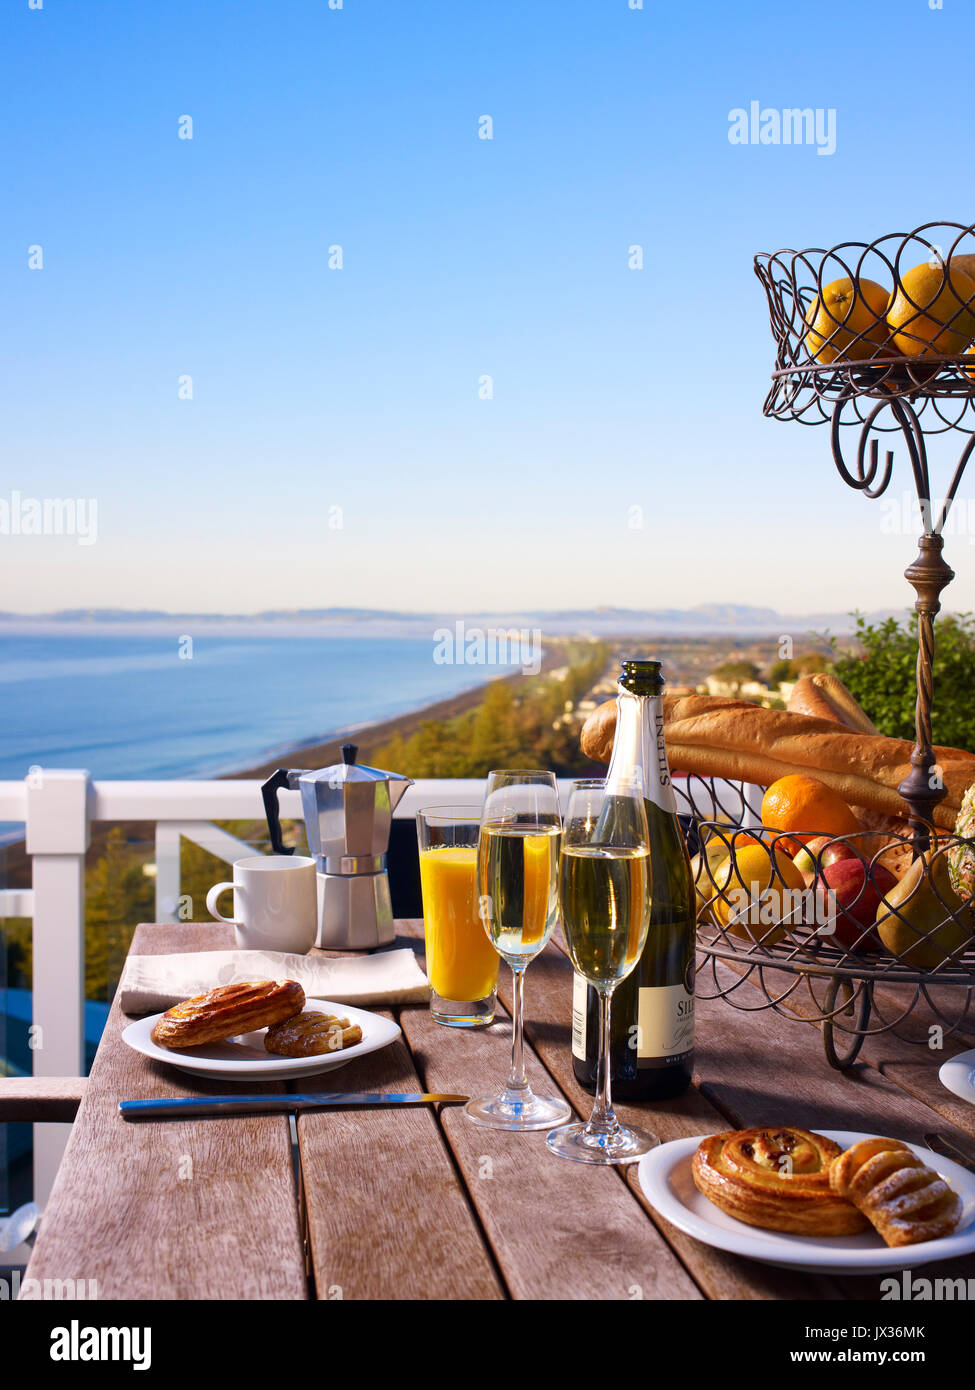 Breakfast view over Napier Hawkes Bay towards cape kidknappers from bluff hill Stock Photo